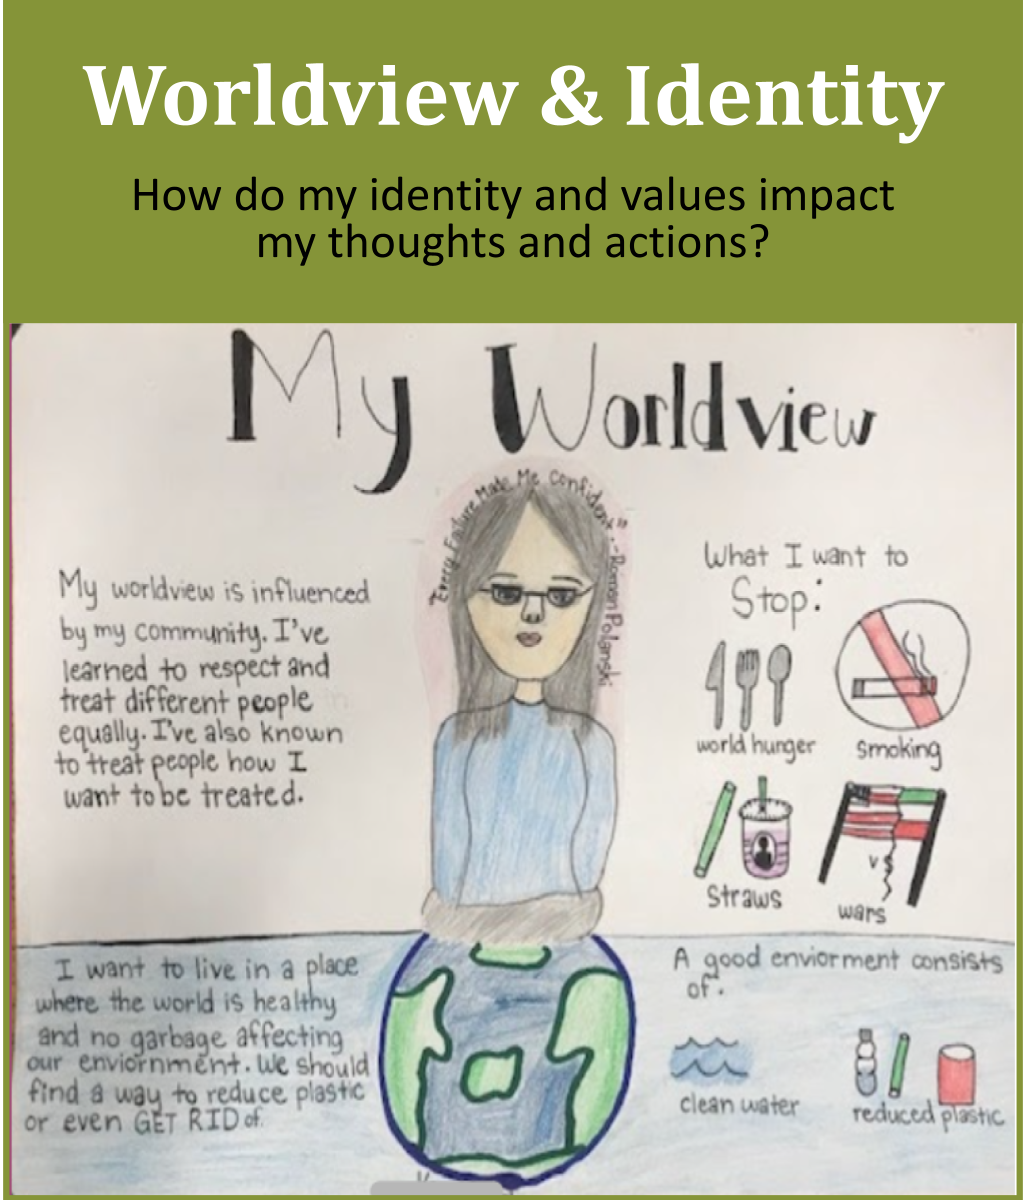 How do my identities and values impact how I see the world - Image of a student's 'Worldview" poster